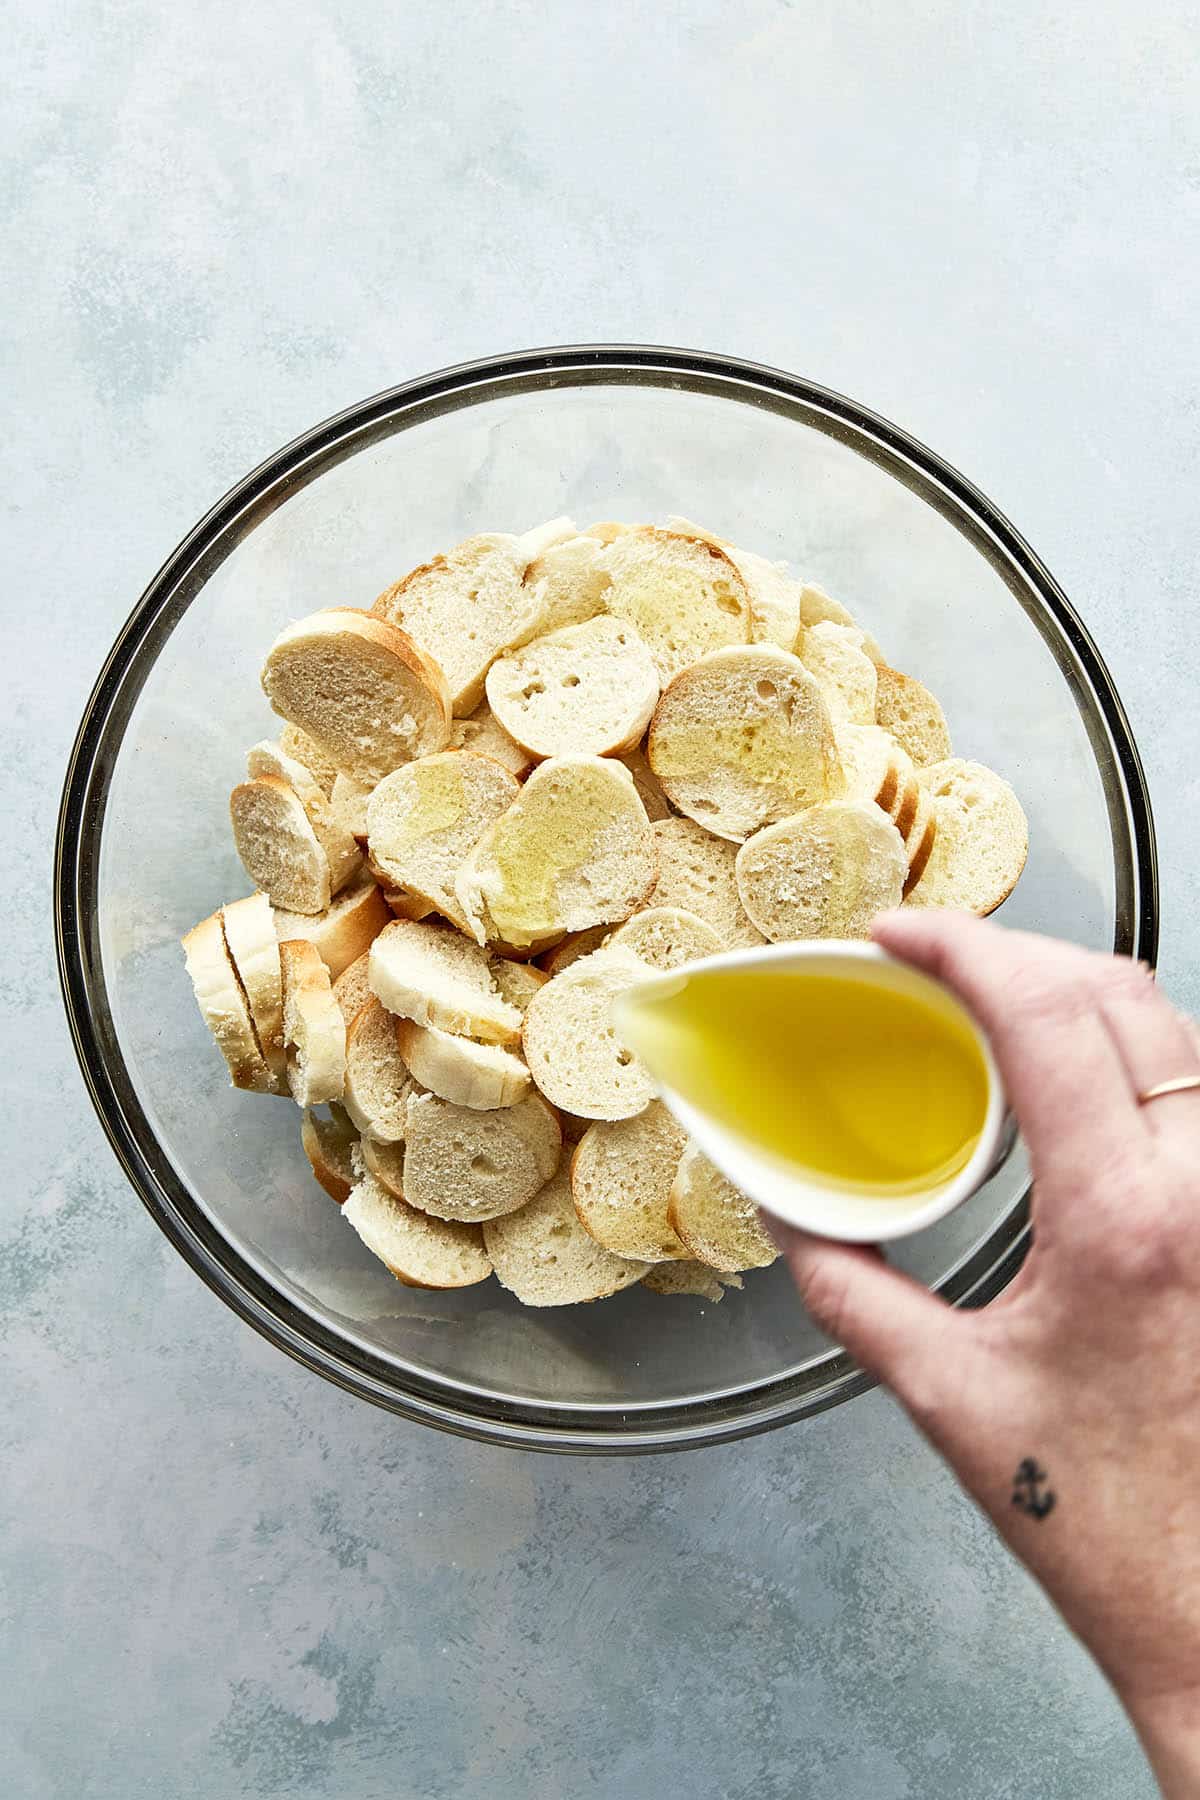 A hand holding a small measuring cup and pouring oil over a bowl of sliced bagel pieces.